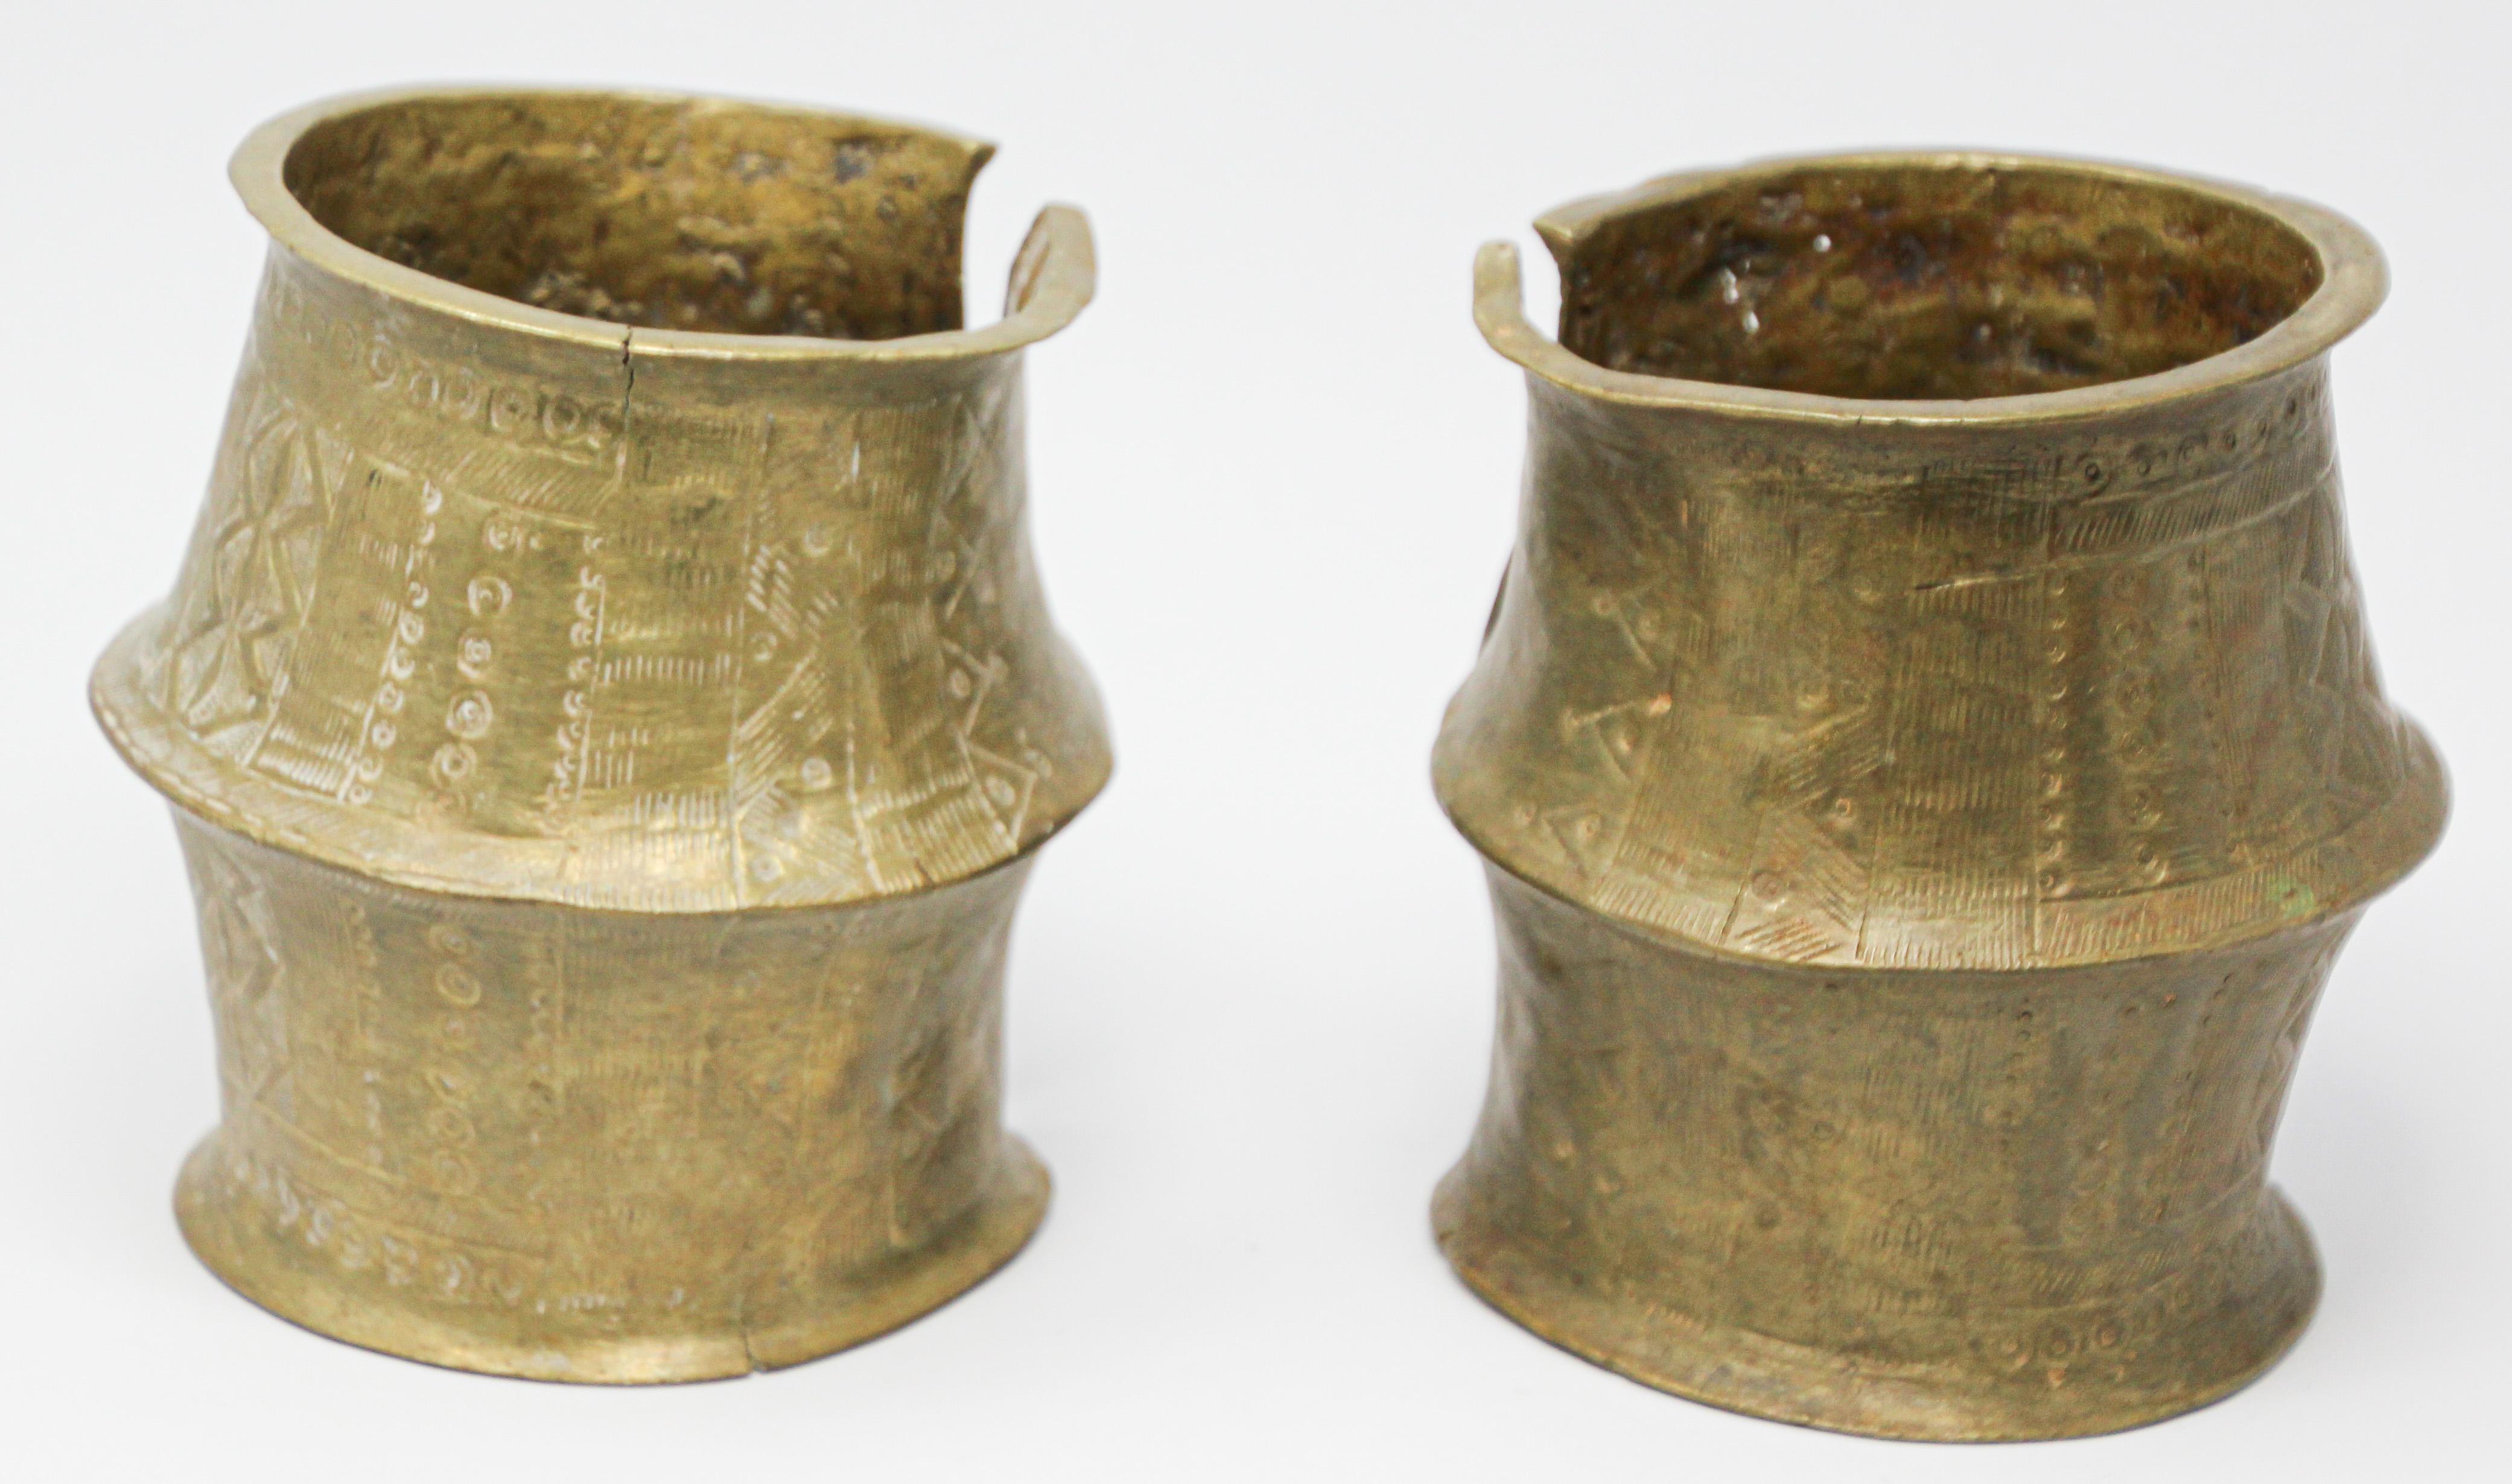 An early 20th century antique African tribal leg band (ankle bracelet), 
These leg bands were both currency and status symbols for the Mongo tribe of northwest Congo. 
They were made by pouring hot bronze and tin into molds set in the ground. Once